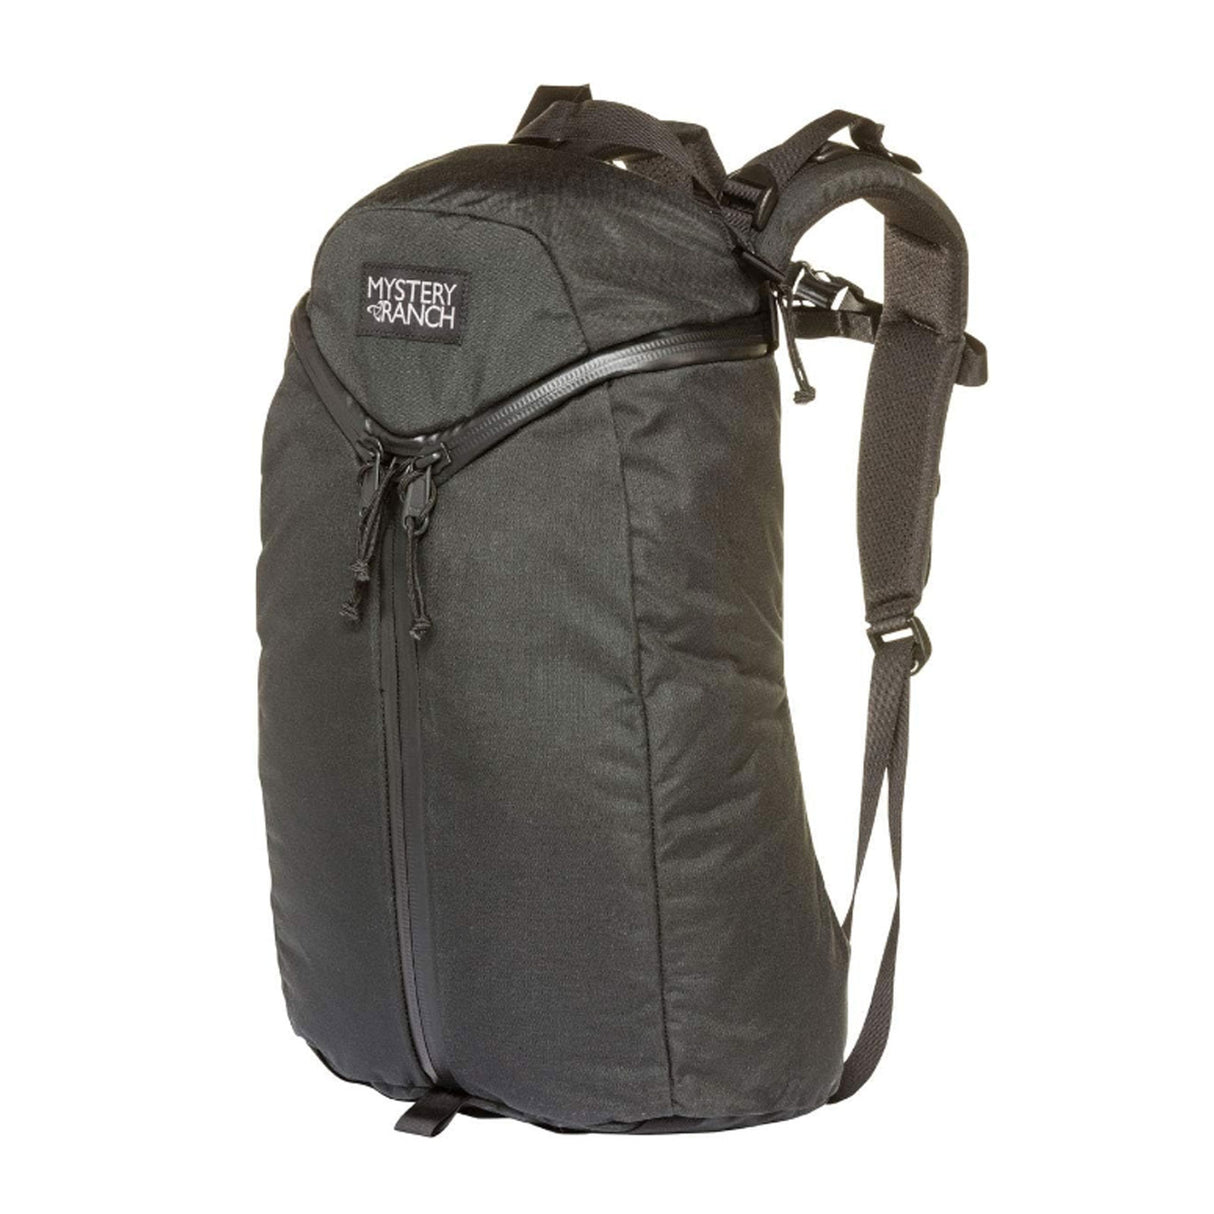 Mystery Ranch Urban Assault 21 Backpack - Black Accessories - Bags - Backpacks - The Heel Shoe Fitters